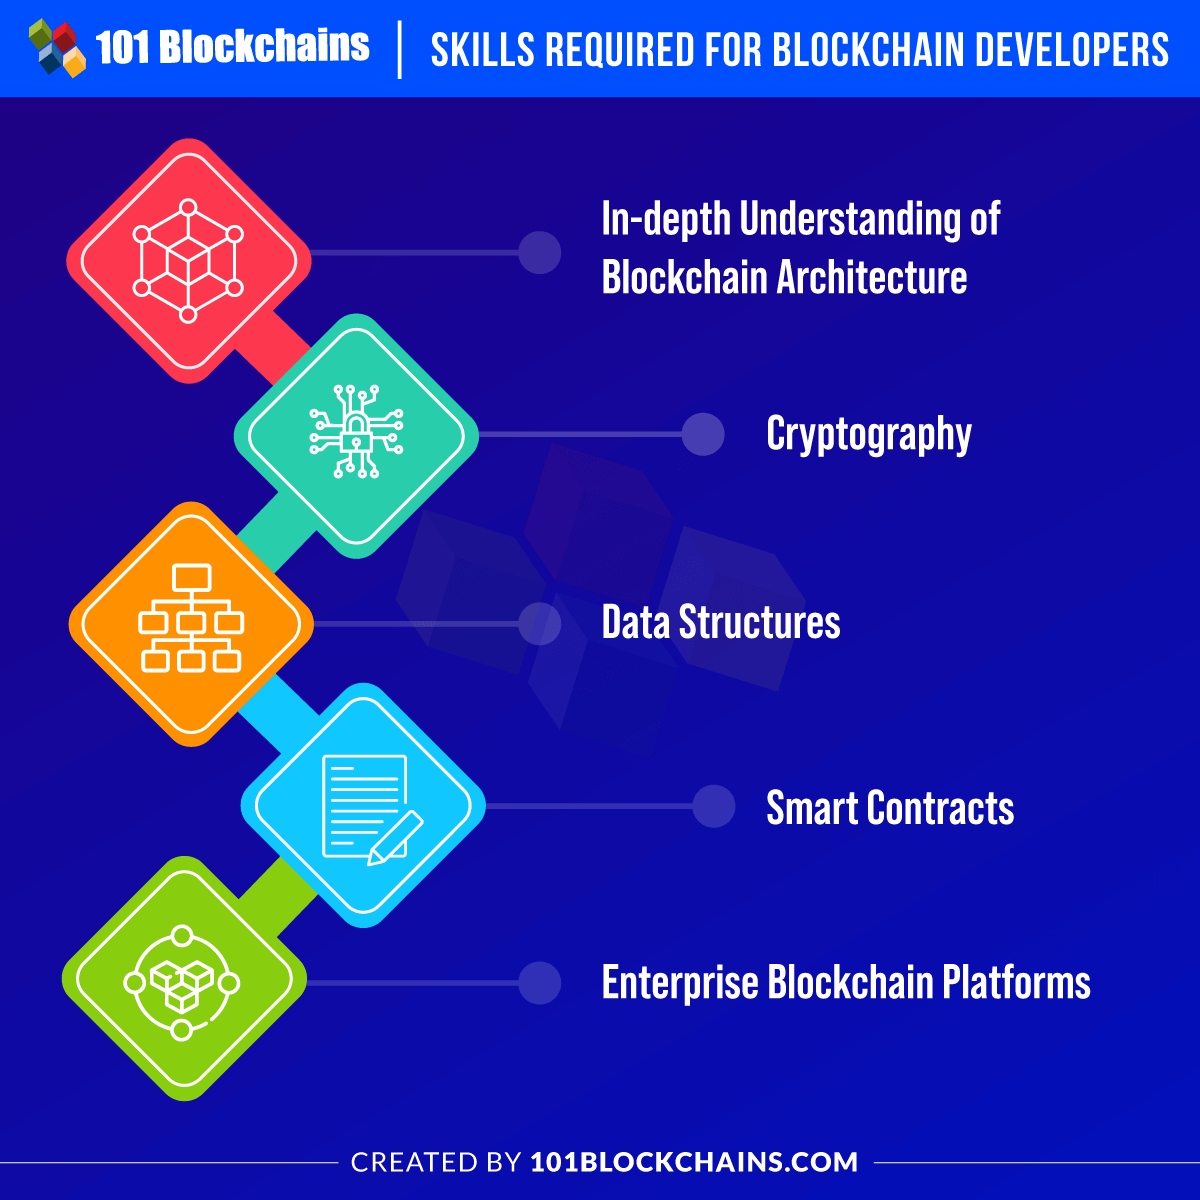 Skills Required for Blockchain Developers